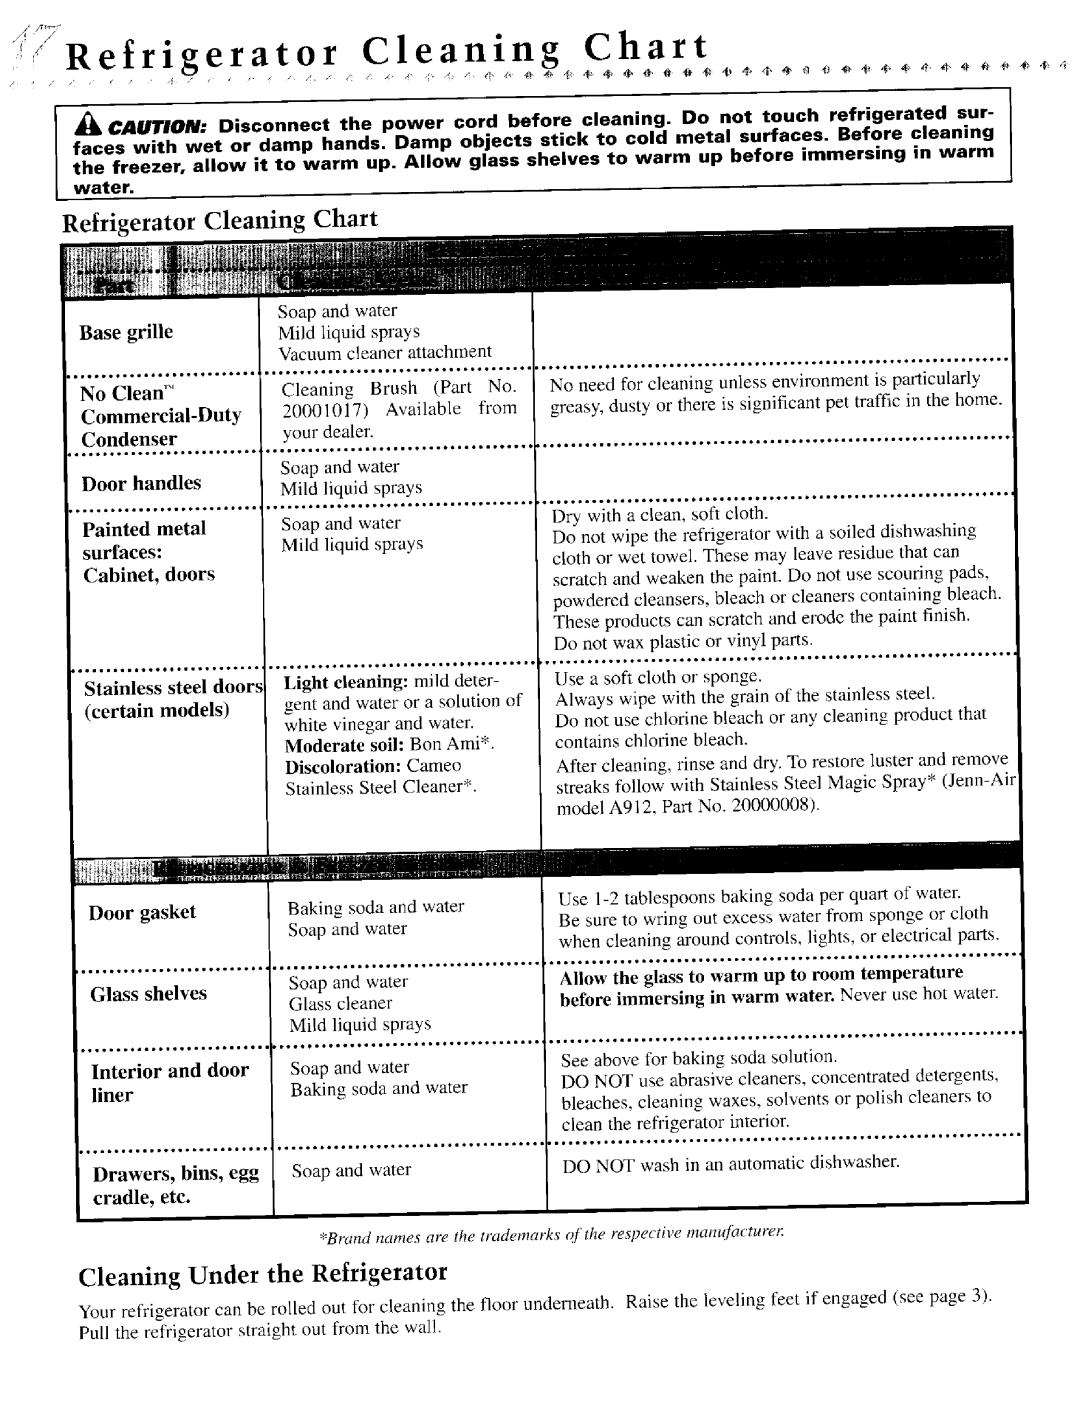 Jenn-Air JCD2289ATB Refrigerator Cleaning Chart, Cleaning Under the Refrigerator, Base grille, Commercial-Duty, liner 